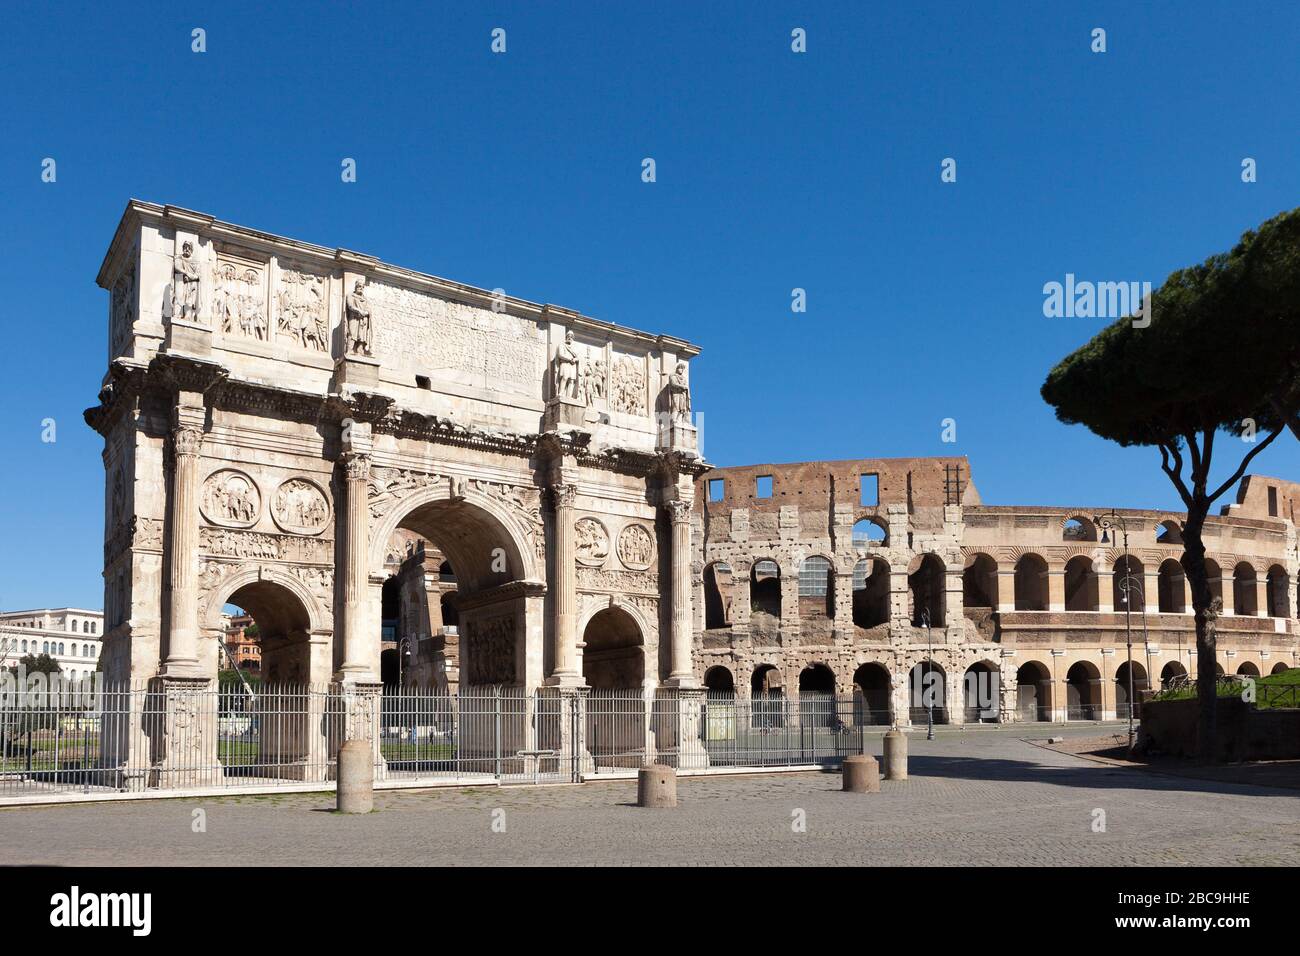 The Arch of Constantine (Arco di Costantino).  Triumphal arch and Colosseum on background. Rome, Italy Stock Photo